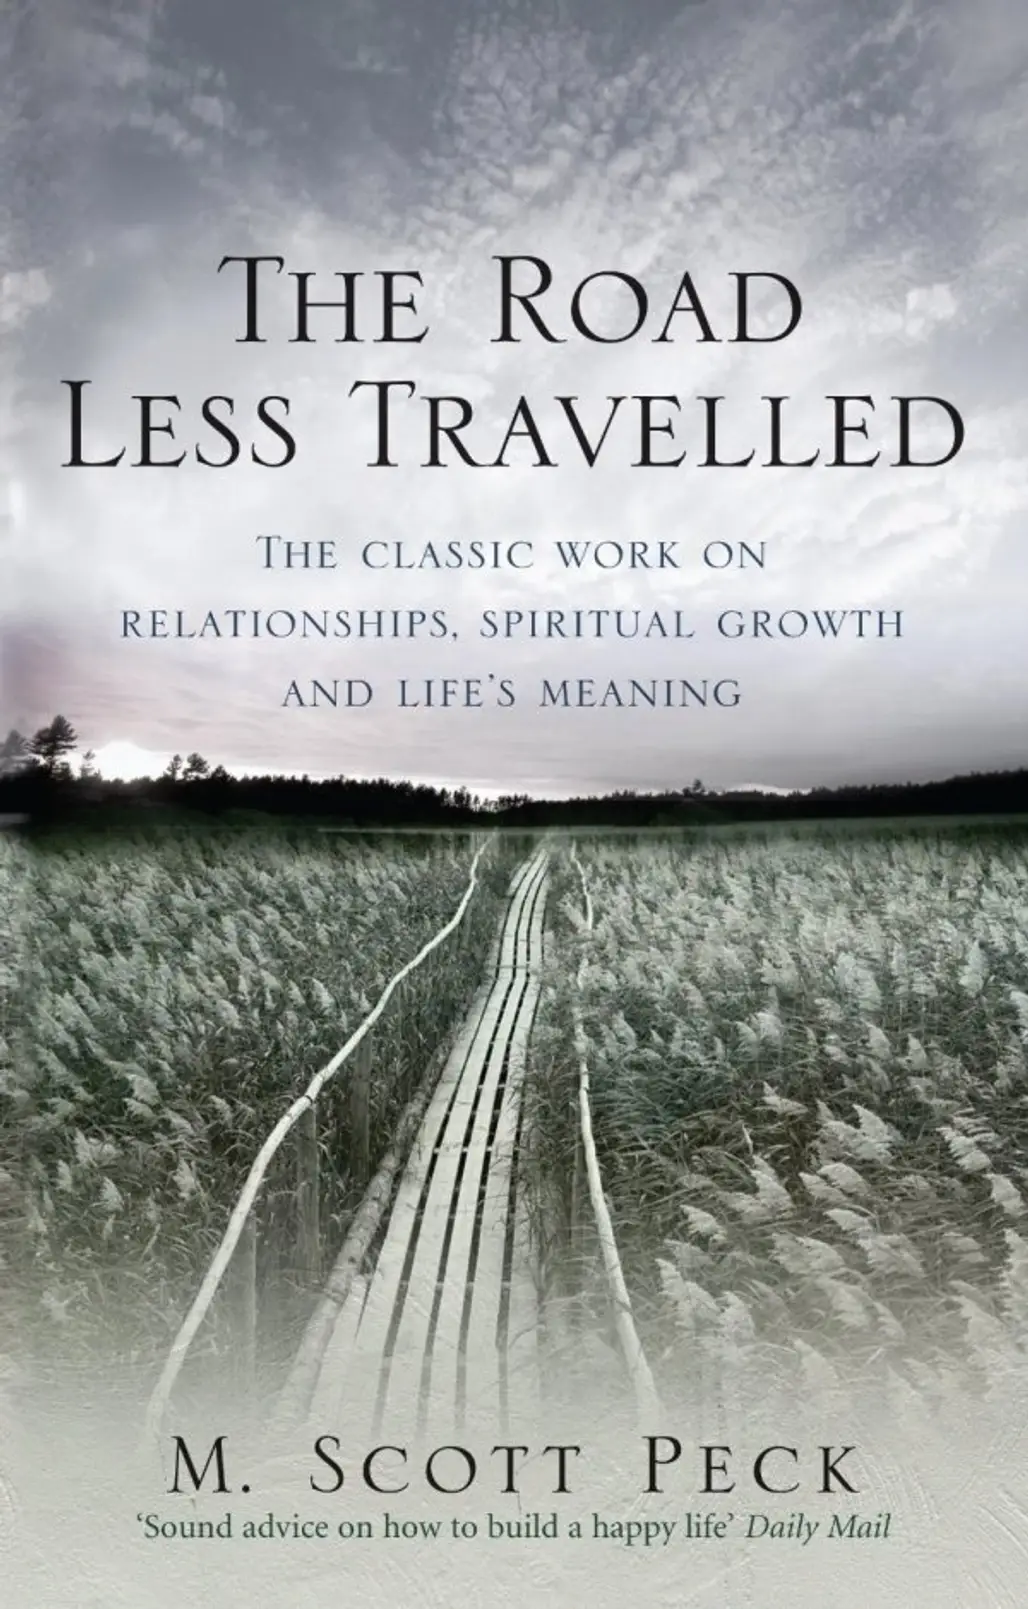 The Road Less Travelled by M Scott Peck